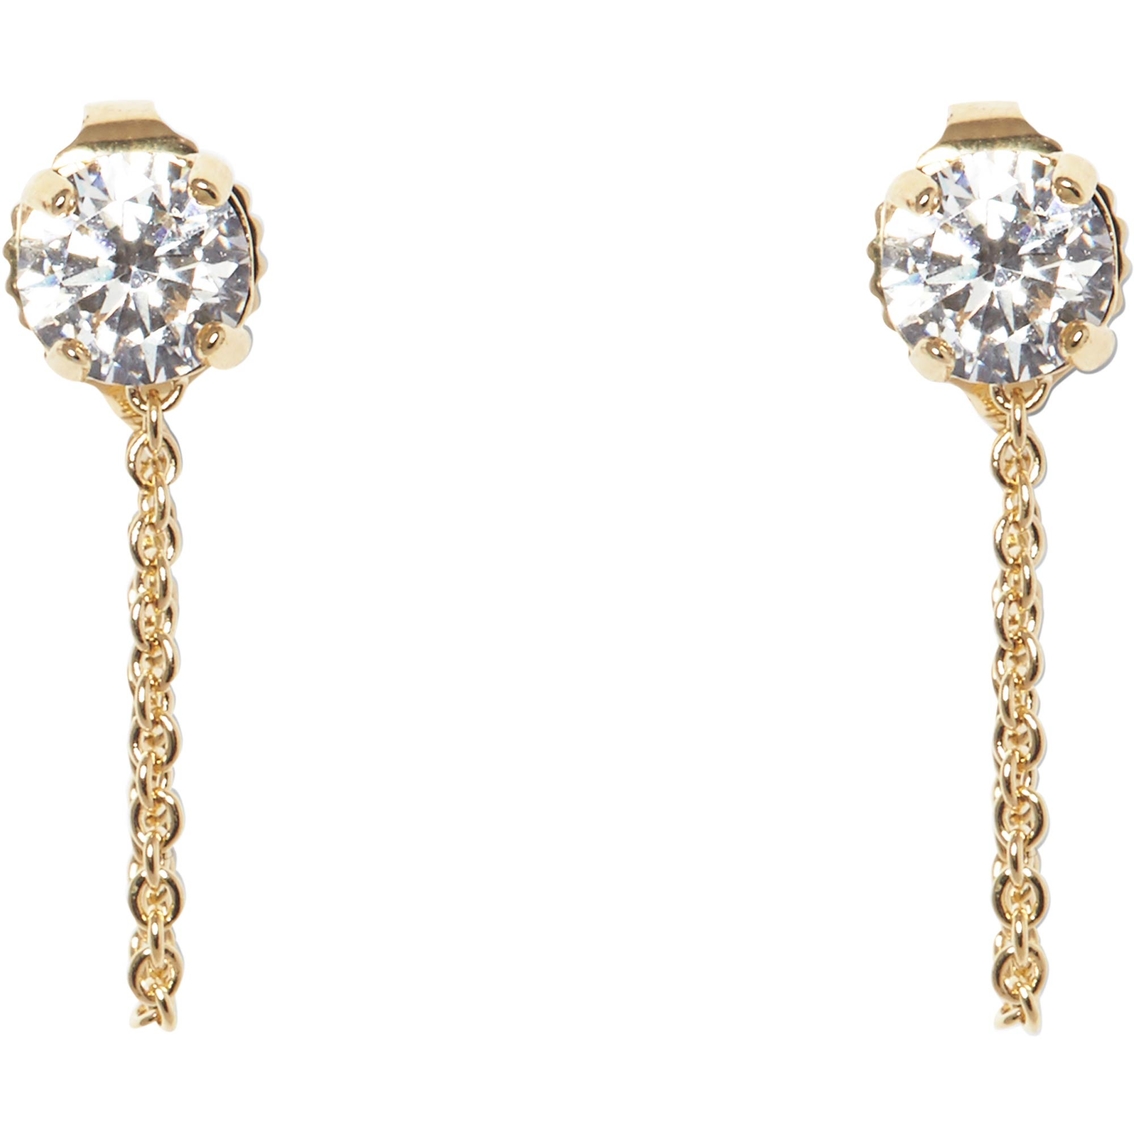 Vince Camuto Goldtone Stud Drop Earrings With Swag Chain | Fashion ...